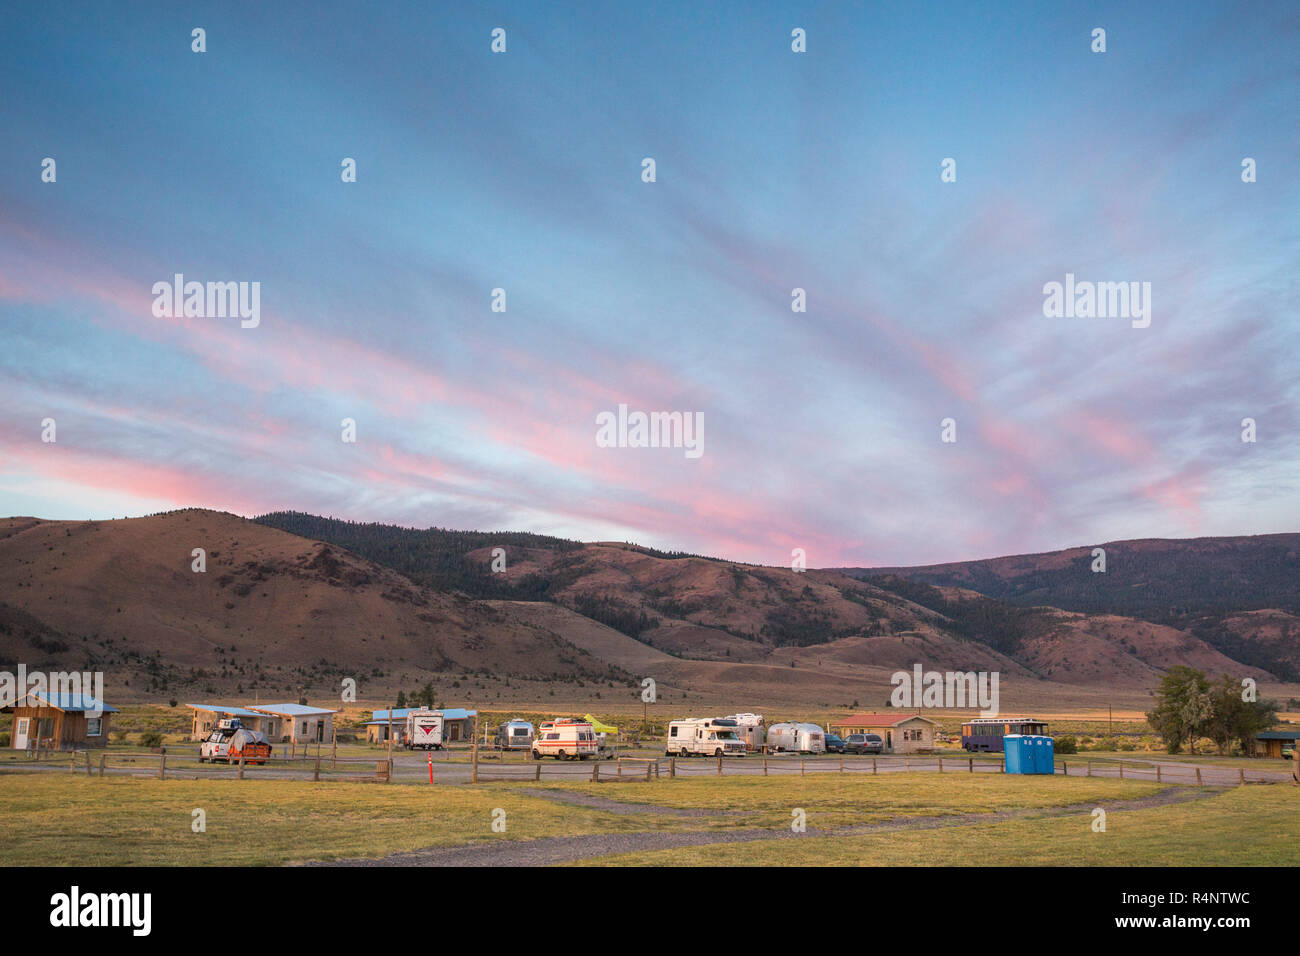 View of group of trailers and RVs at sunset, Summer Lake, Oregon, USA Stock Photo